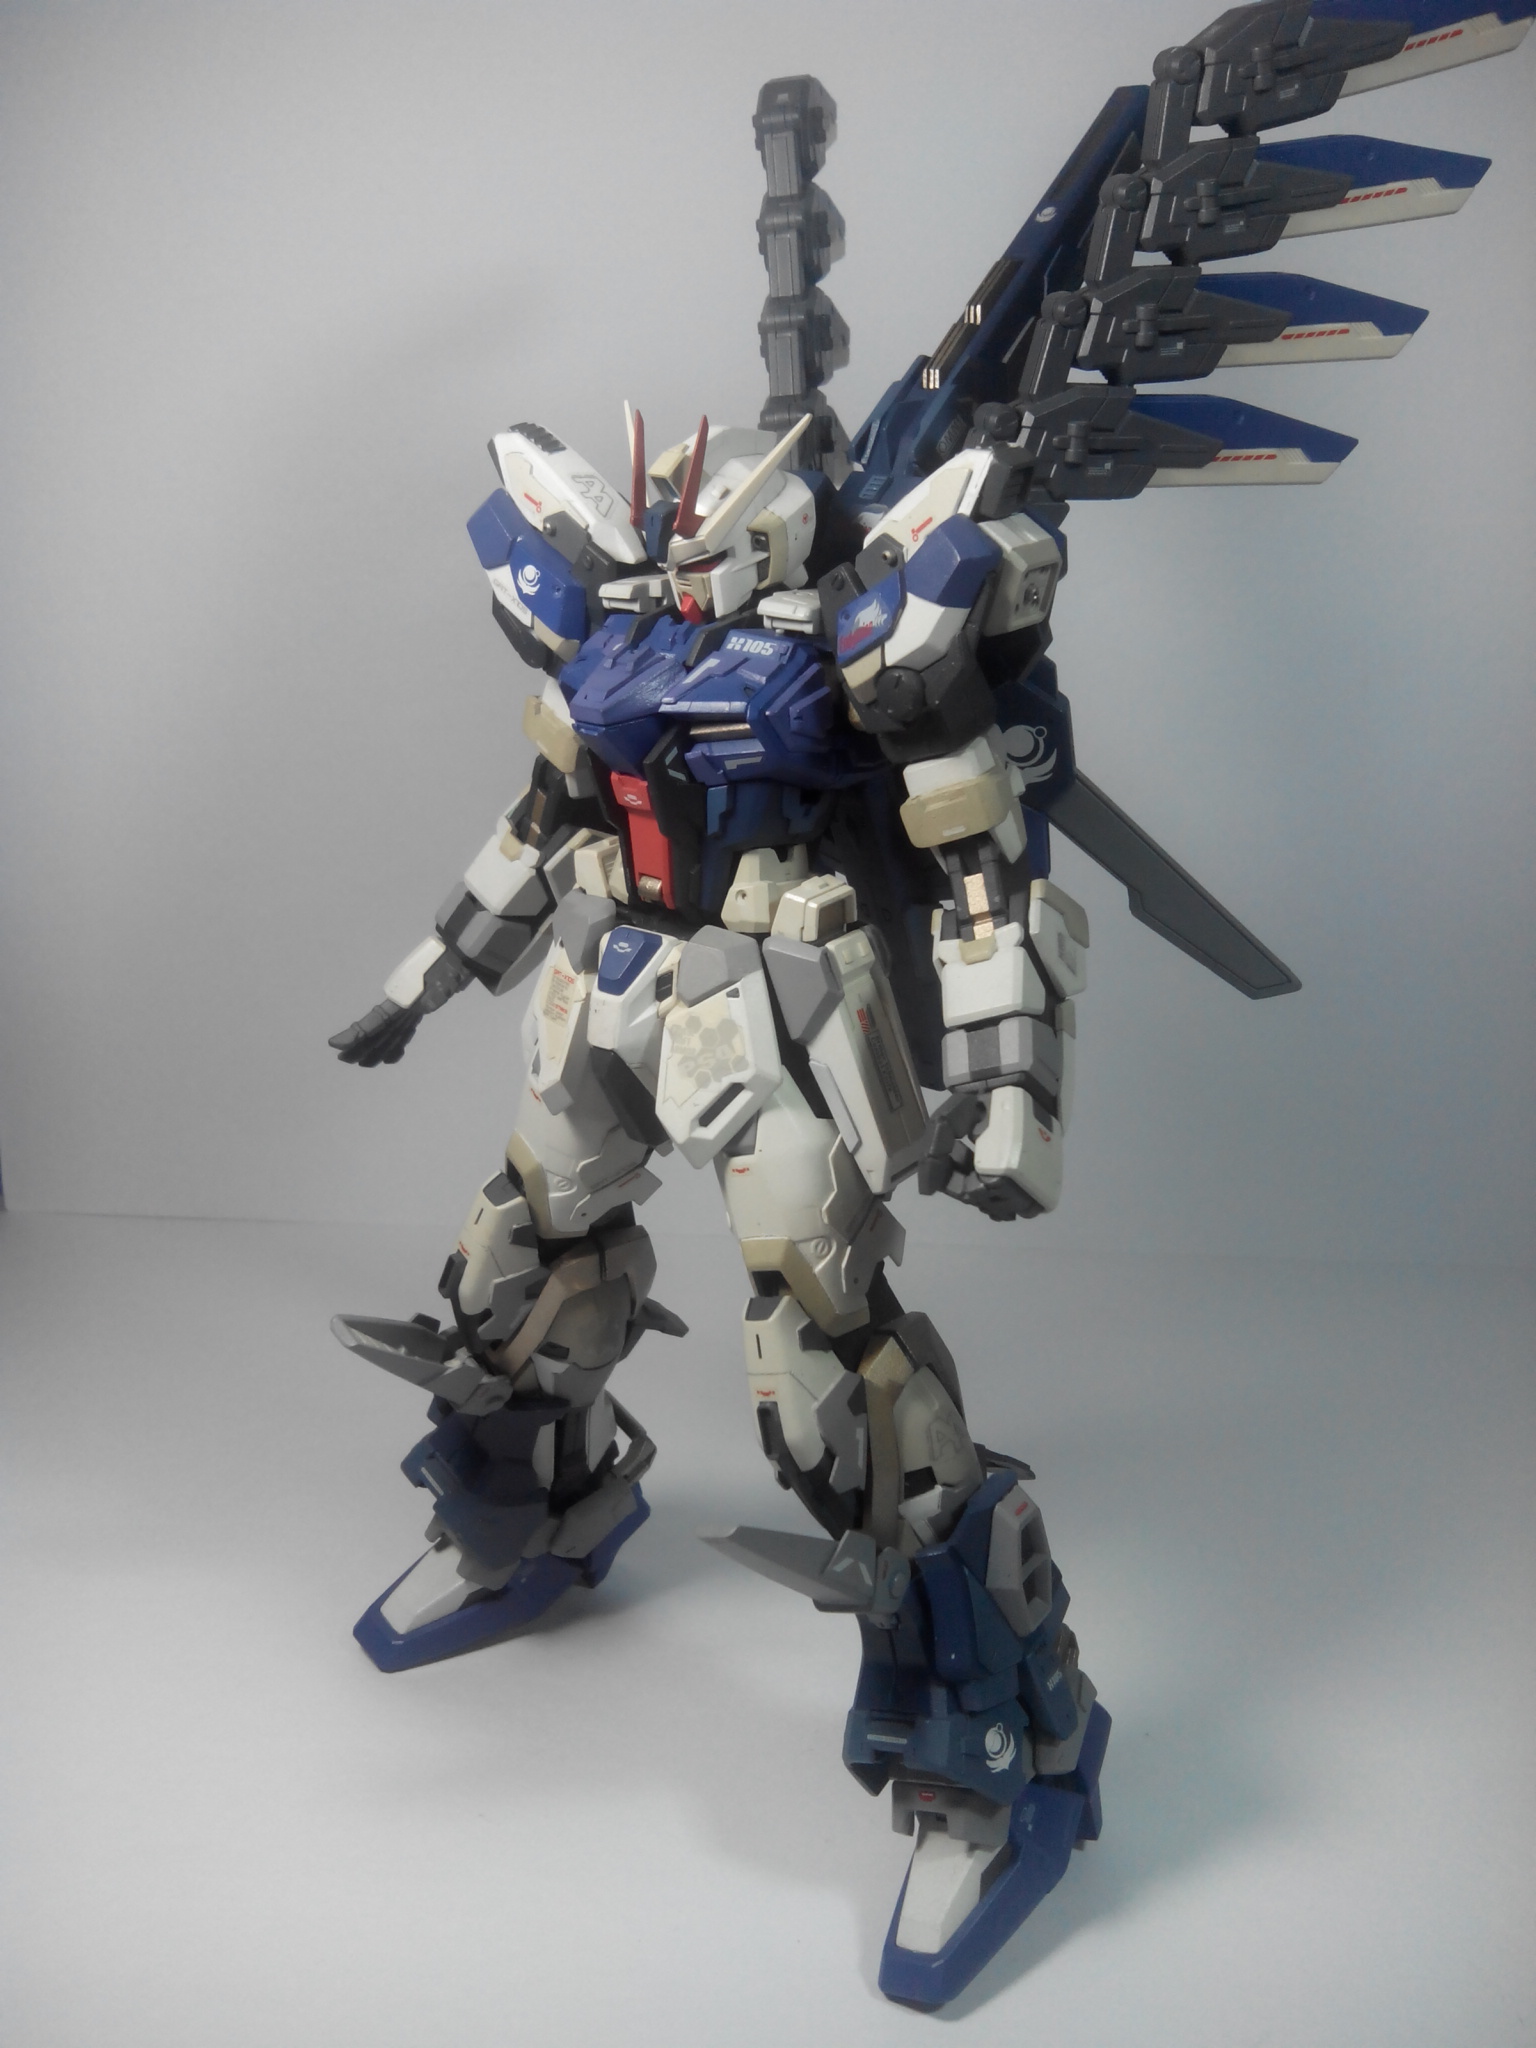 CX20 Mecha Works’ GBWC 2013 Phil entry “Winged Strike” Photoreview Hi ...